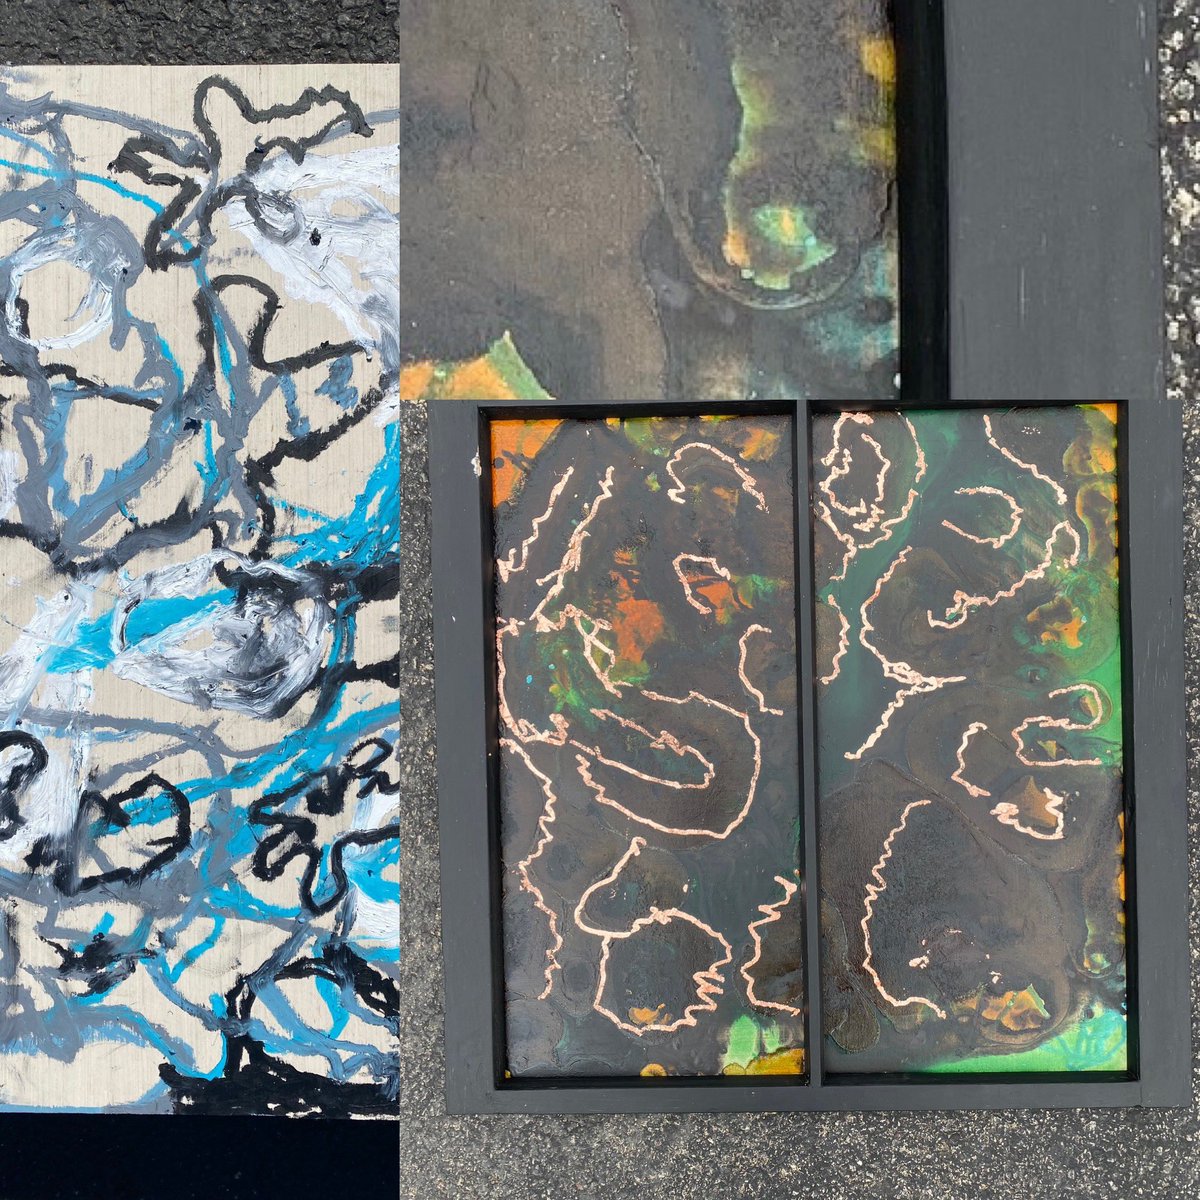 My process  #abstract #art #painting #abstractart #abstractpainting #contemporaryart #CP #cerebralpalsy #pittsburgh #paintanyway #flaming_abstracts